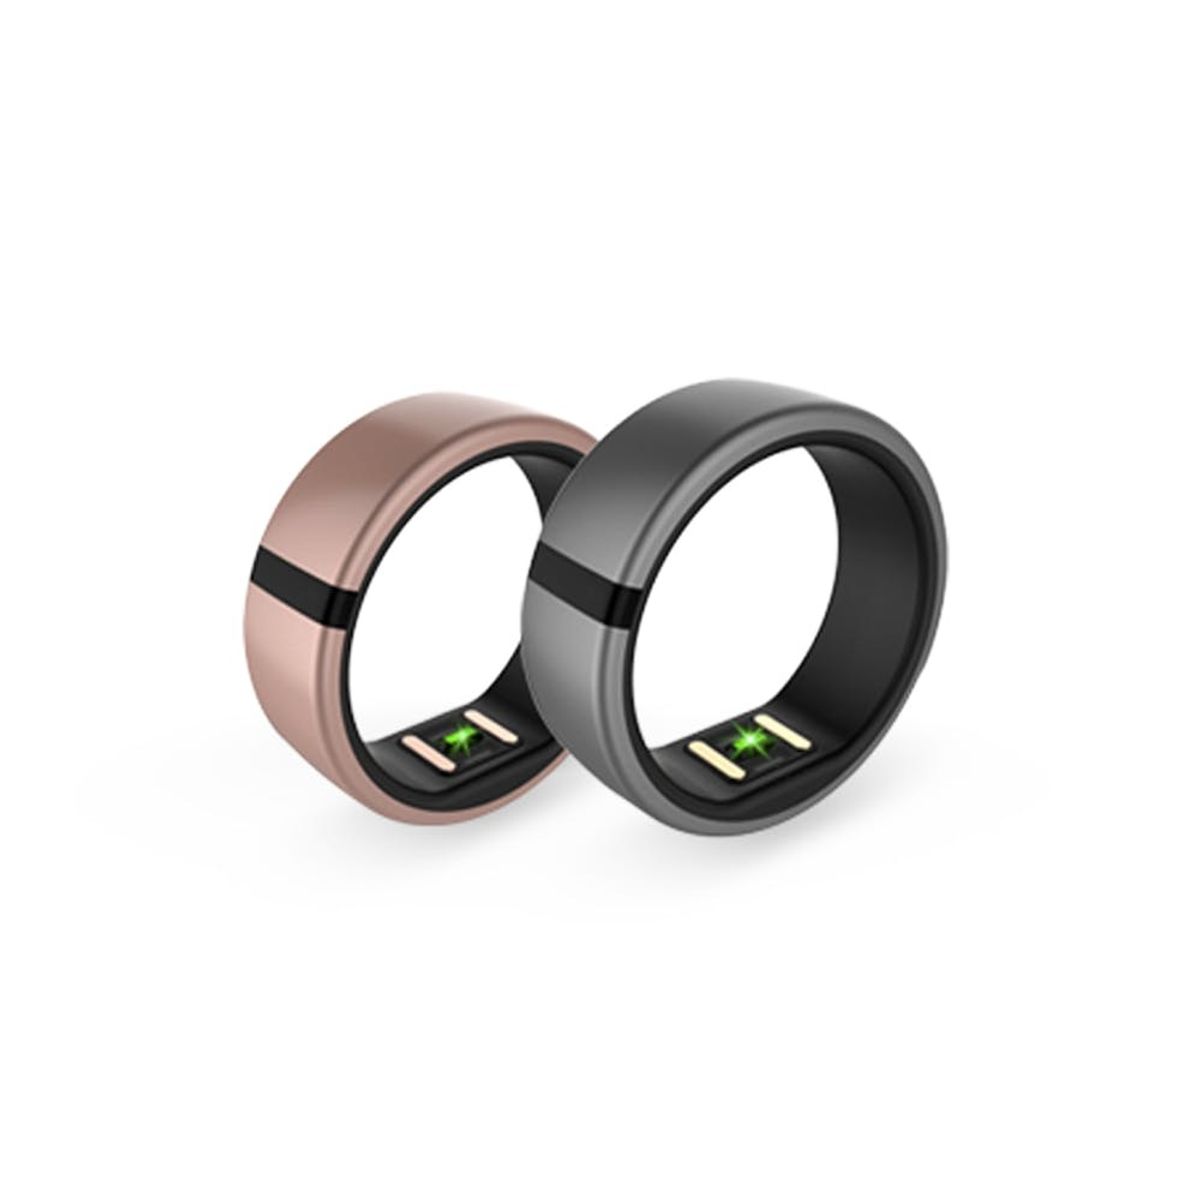 I Was Anti-Fitness Trackers Until I Tried the Motiv Ring